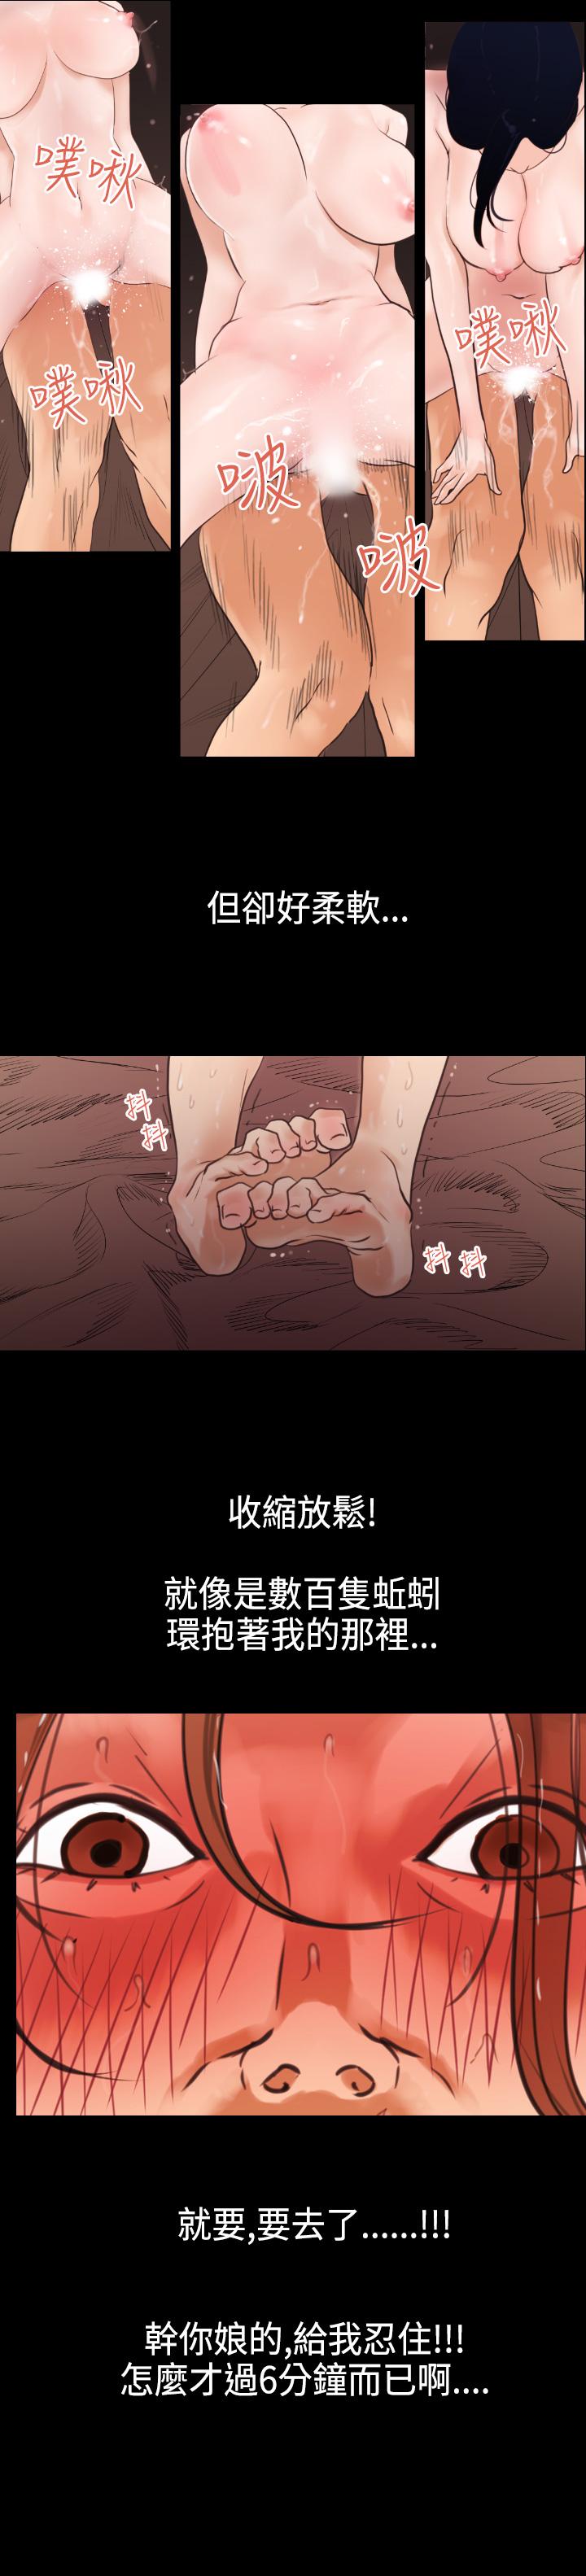 Desire King (慾求王) Ch.1-16 (chinese) 6